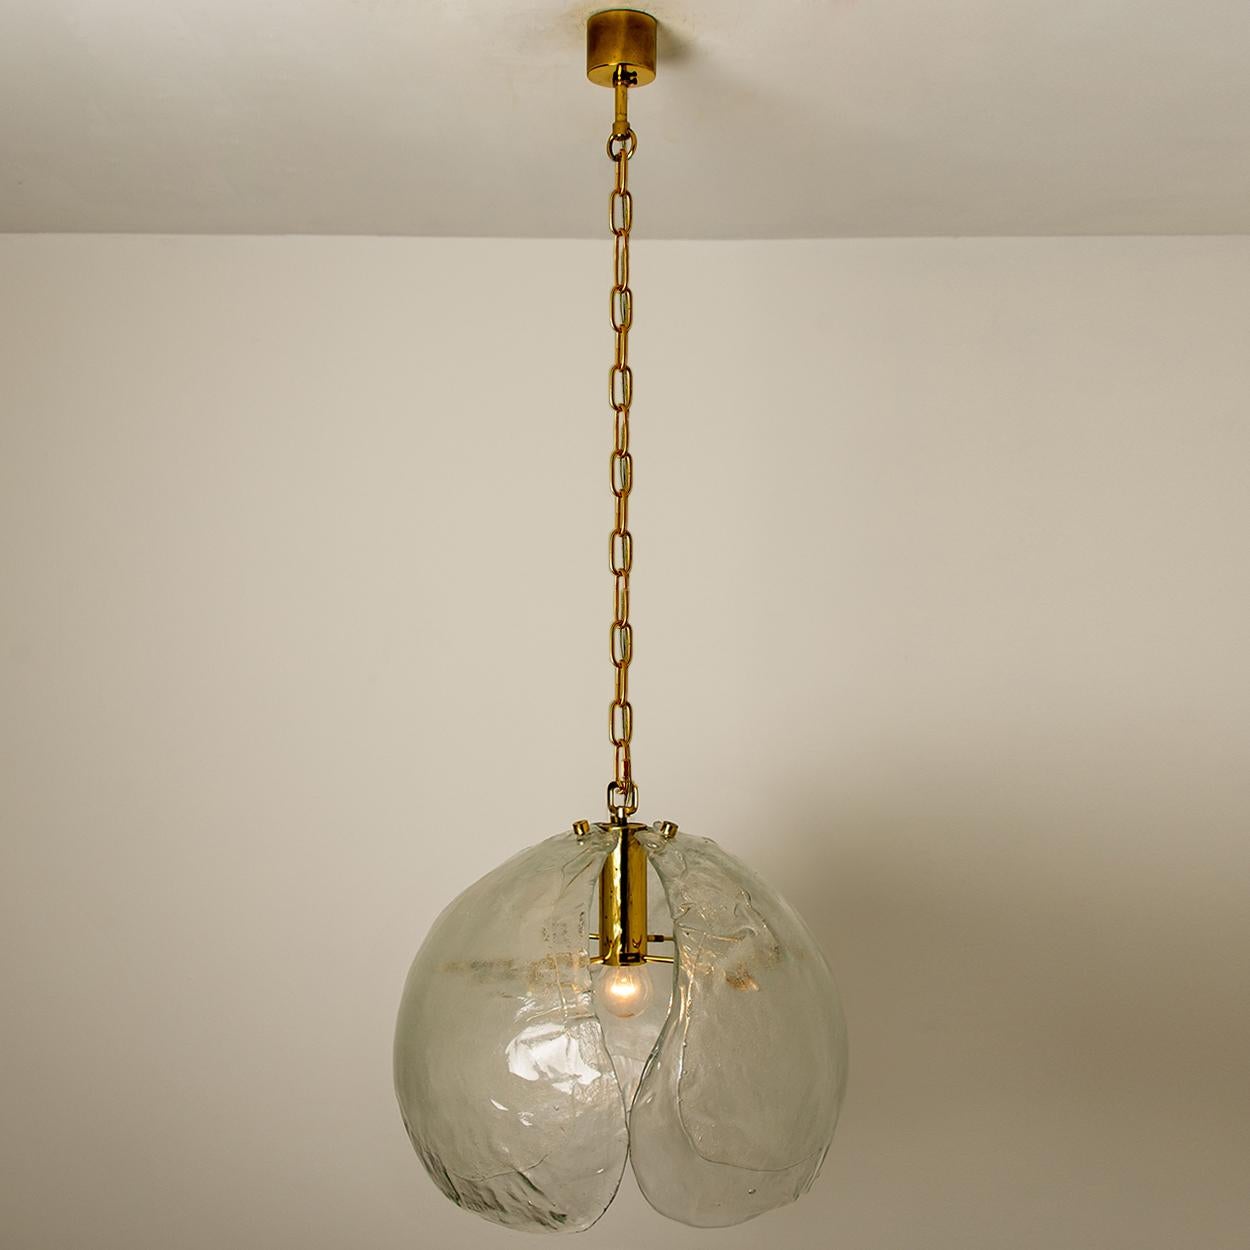 1 of the 2 Kalmar Style Pendant Lights, Clear Glass and Brass, 1970s For Sale 7